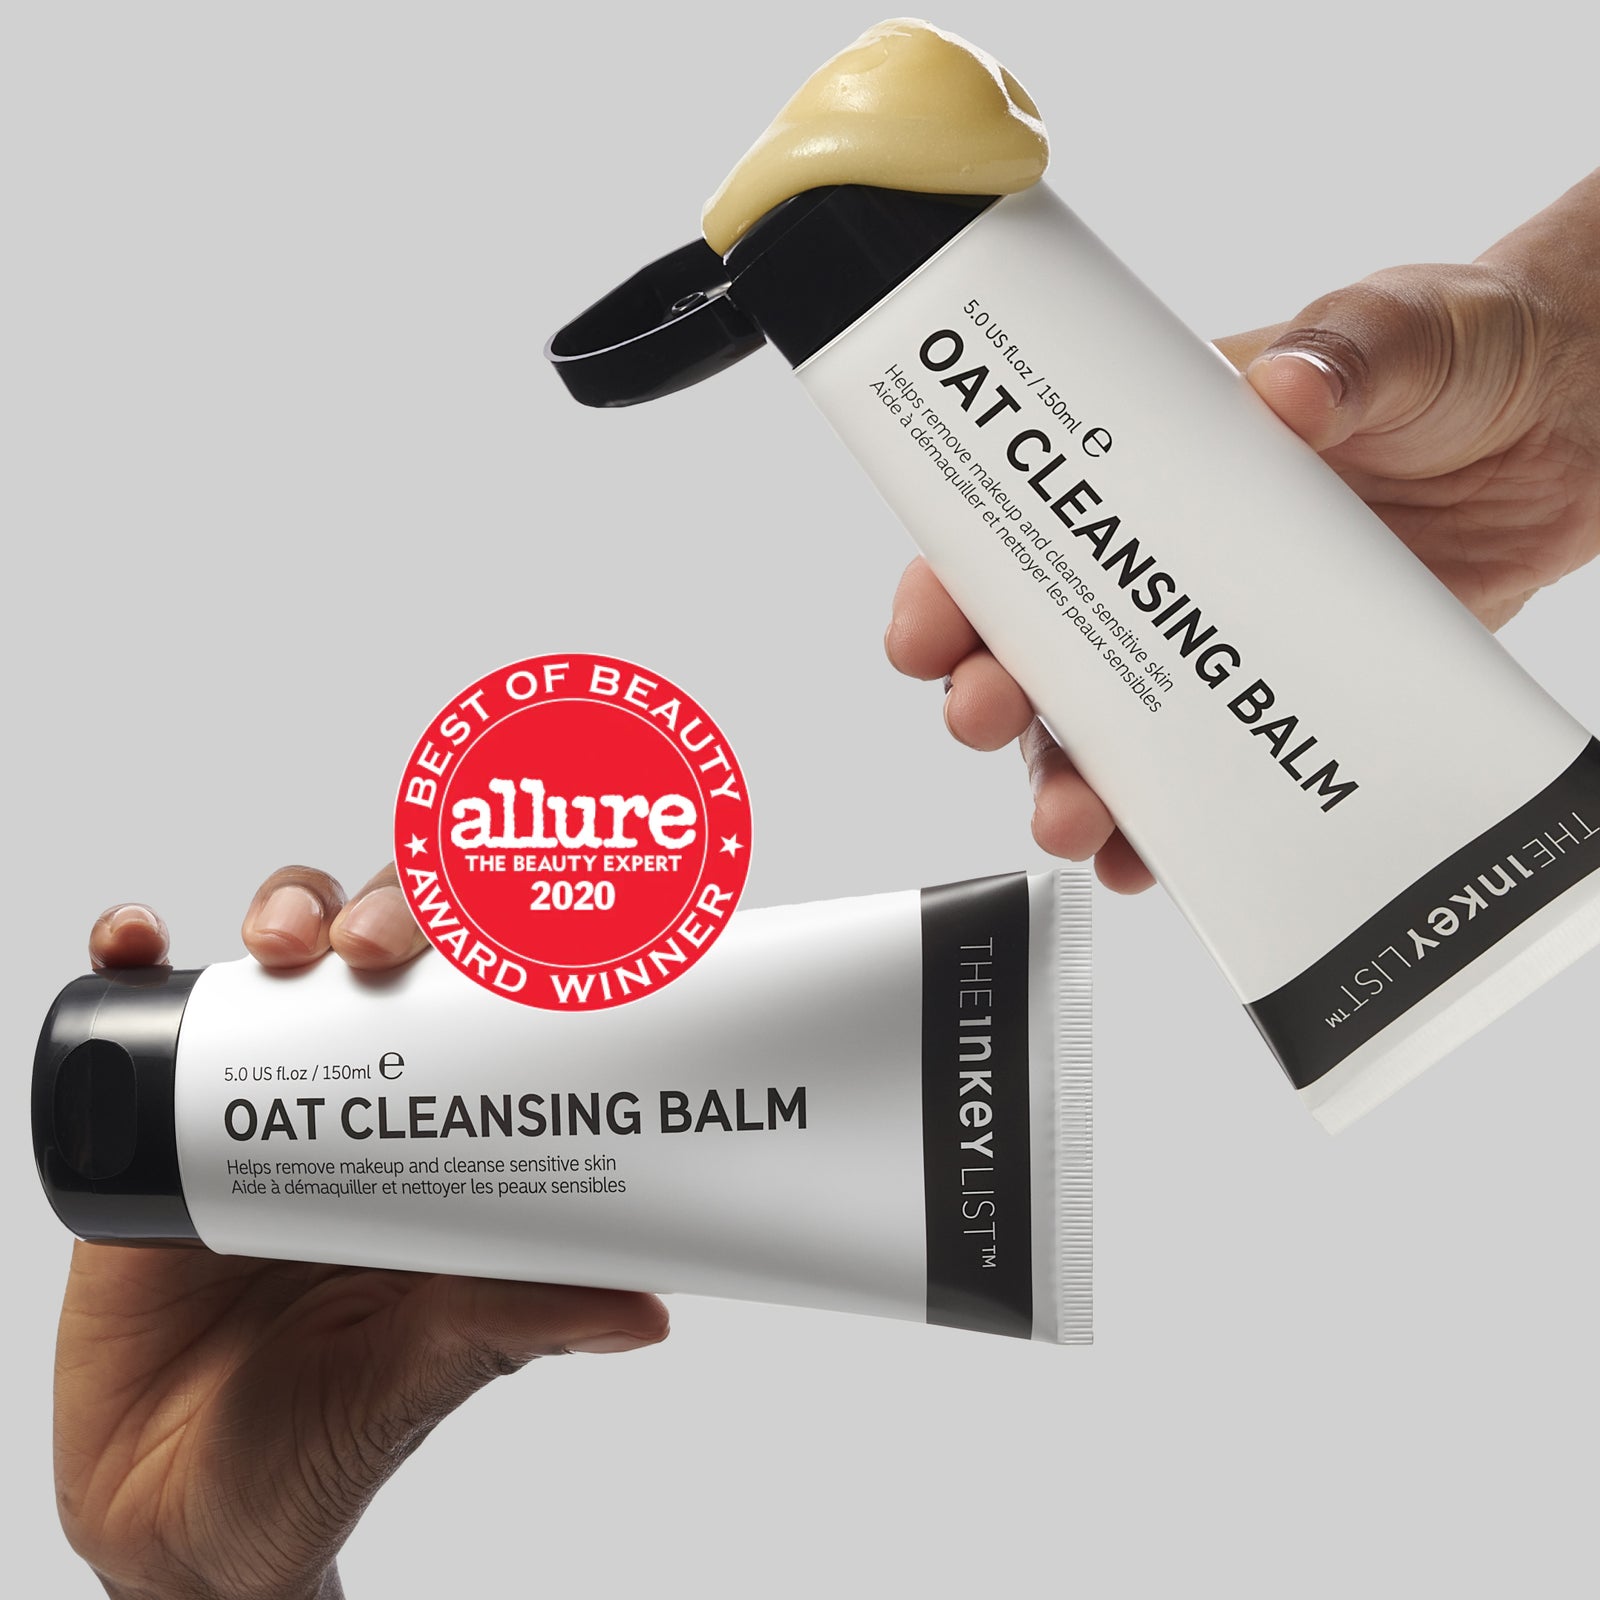 Hands holding Oat Cleansing Balm with awards